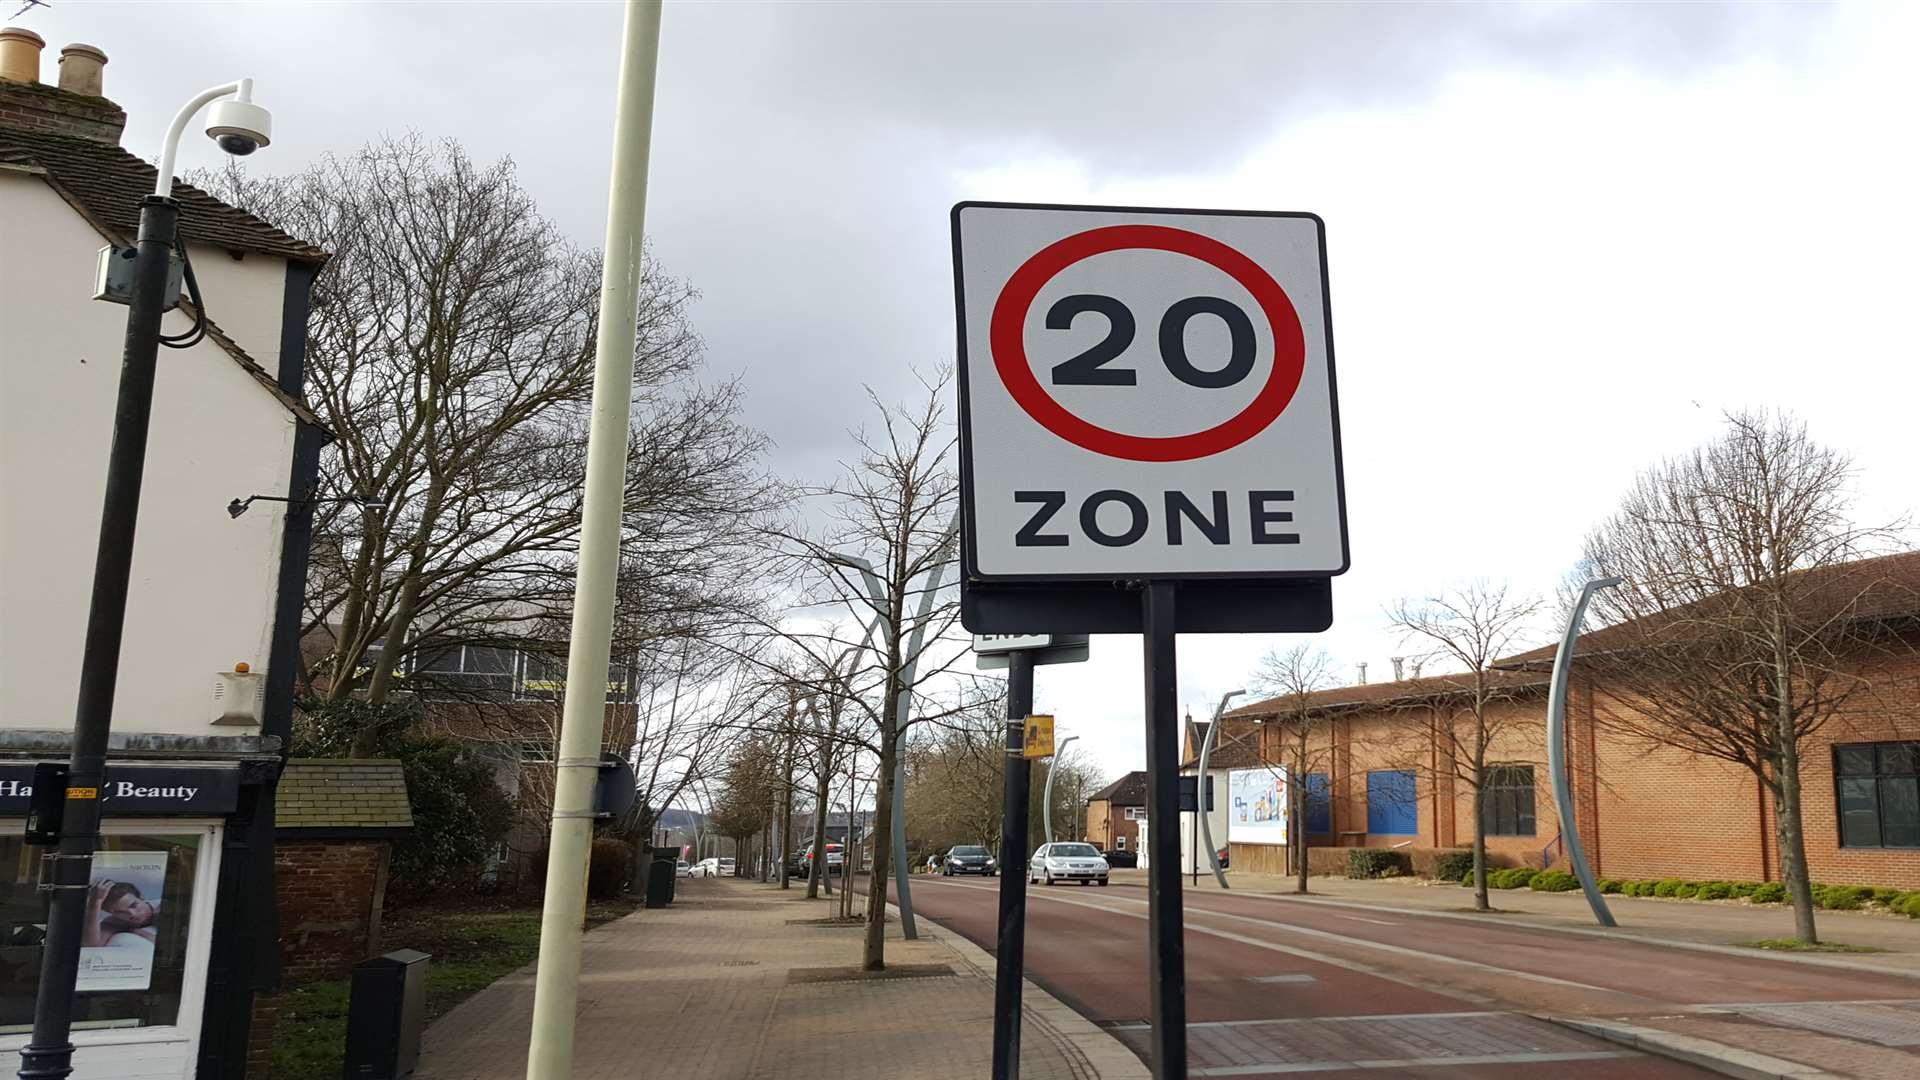 Bowles was caught travelling 70mph in the 20 zone